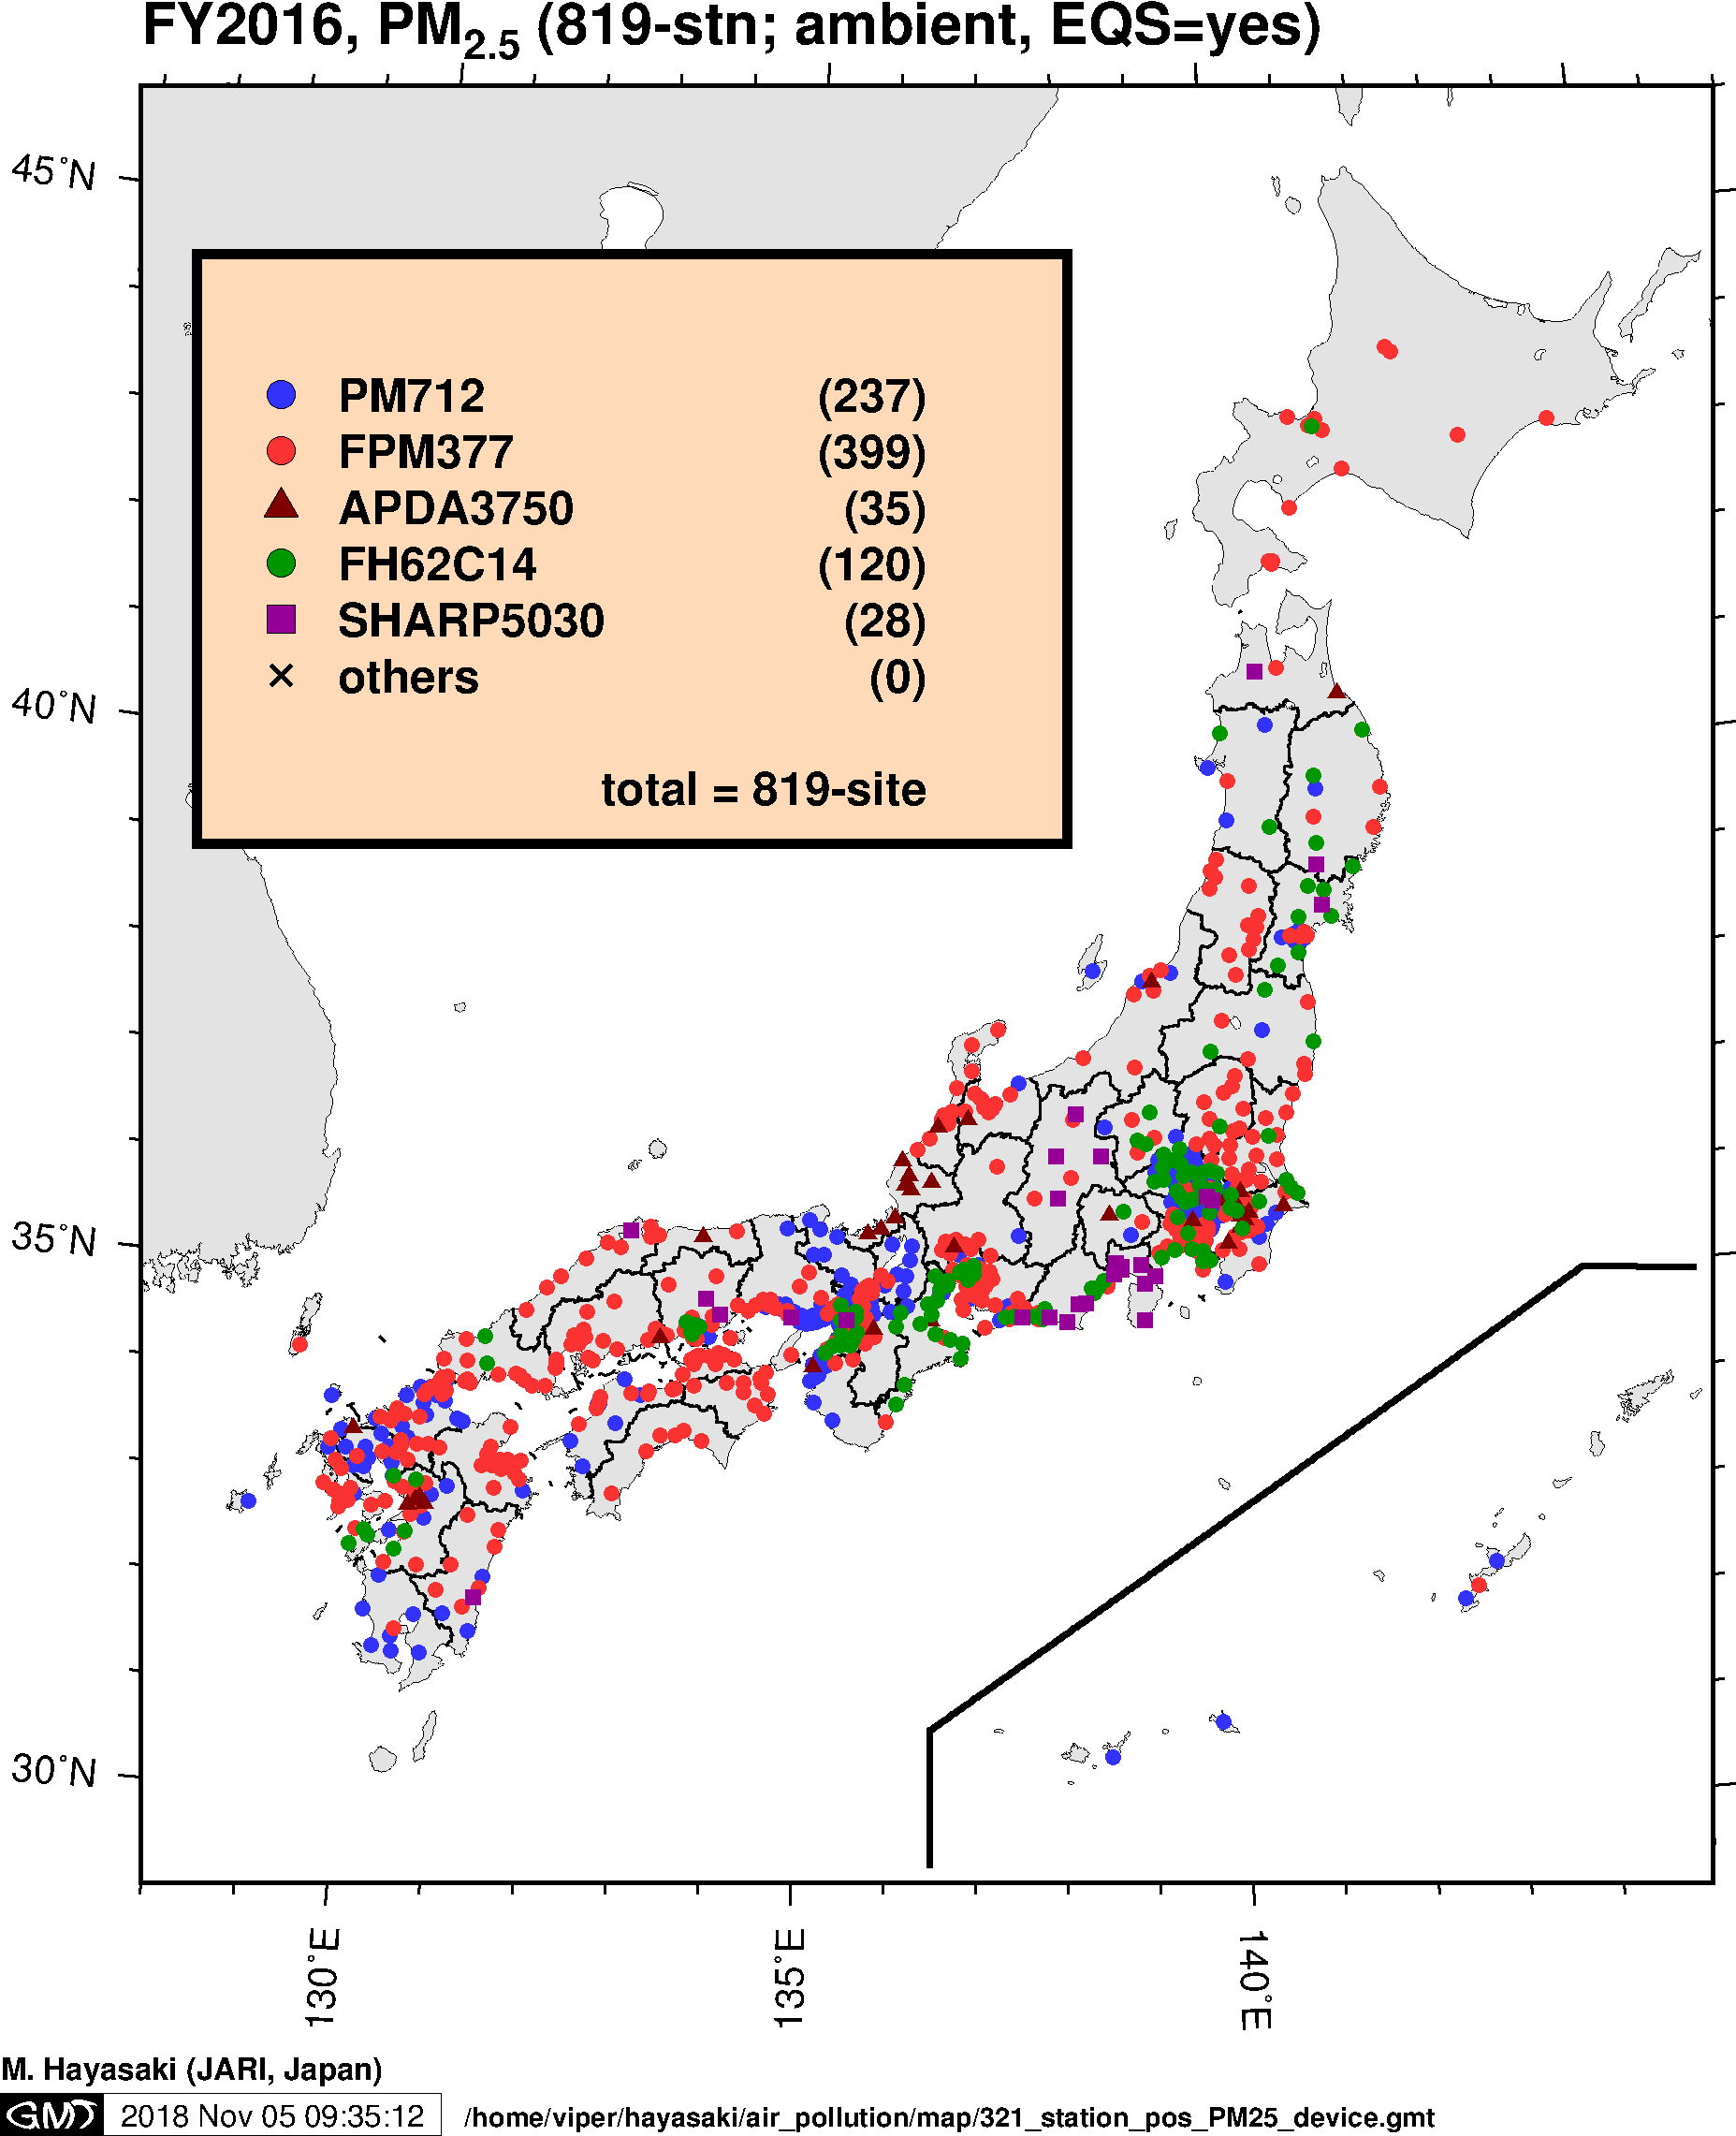 PM2.5 Monitoring devices in Japan (FY2016)